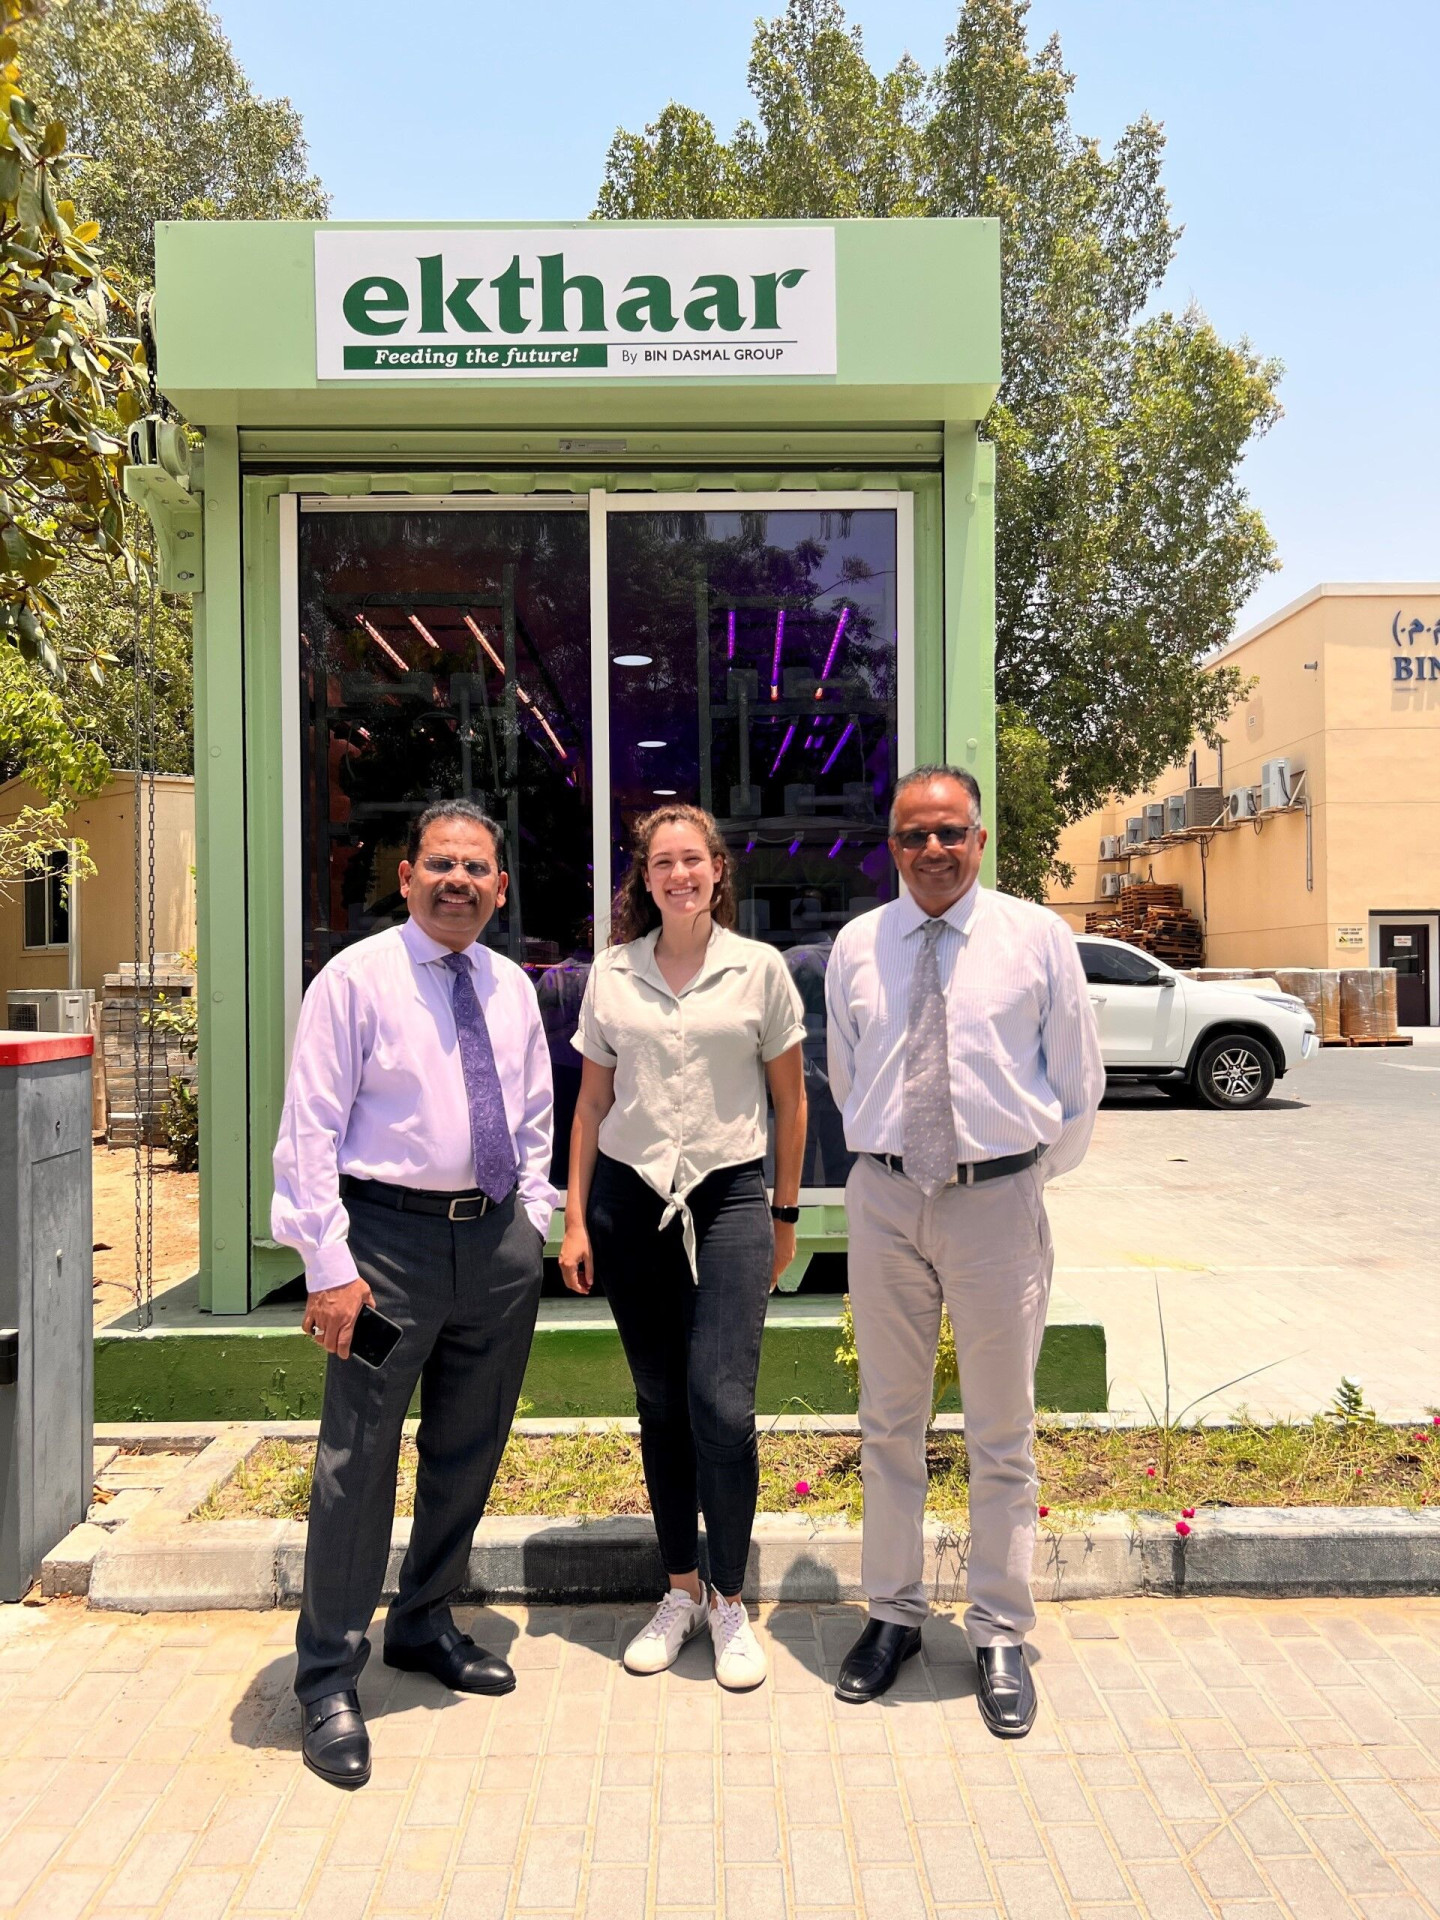 Ekthaar Agricultural LLC, based in Dubai, stands as the first certified farm against the Sustainable Indoor Farming (SIF) standard